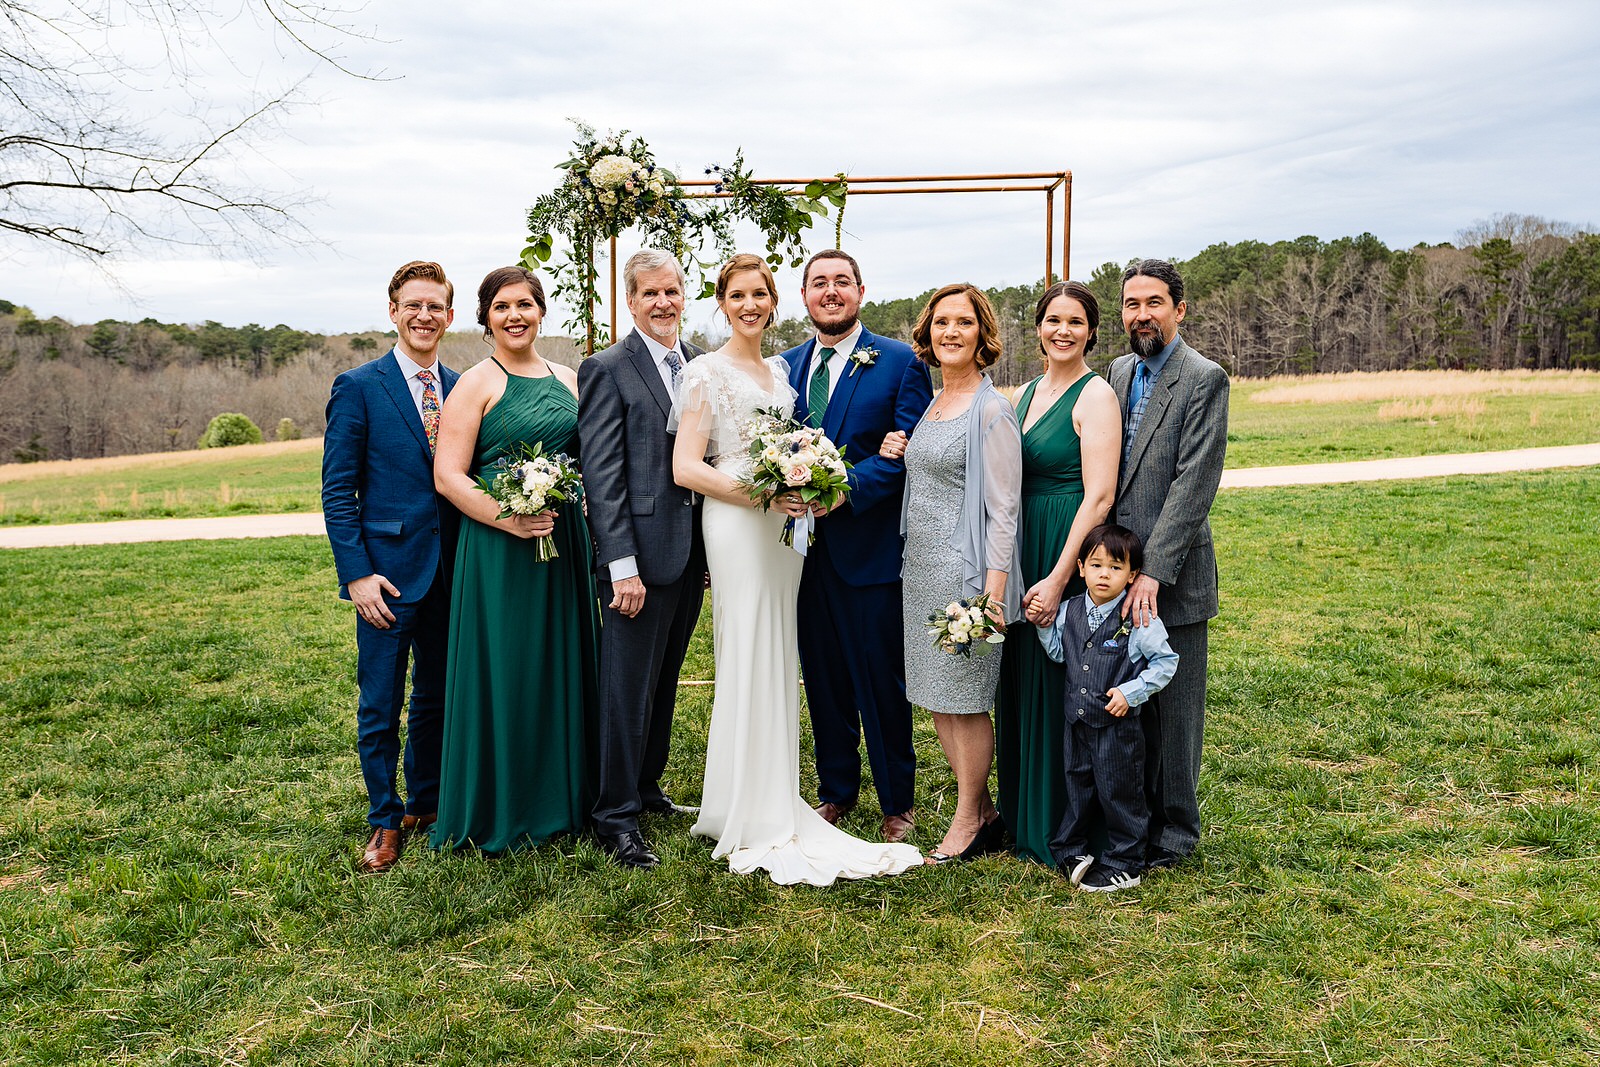 Family portraits on wedding day at The Meadows Raleigh